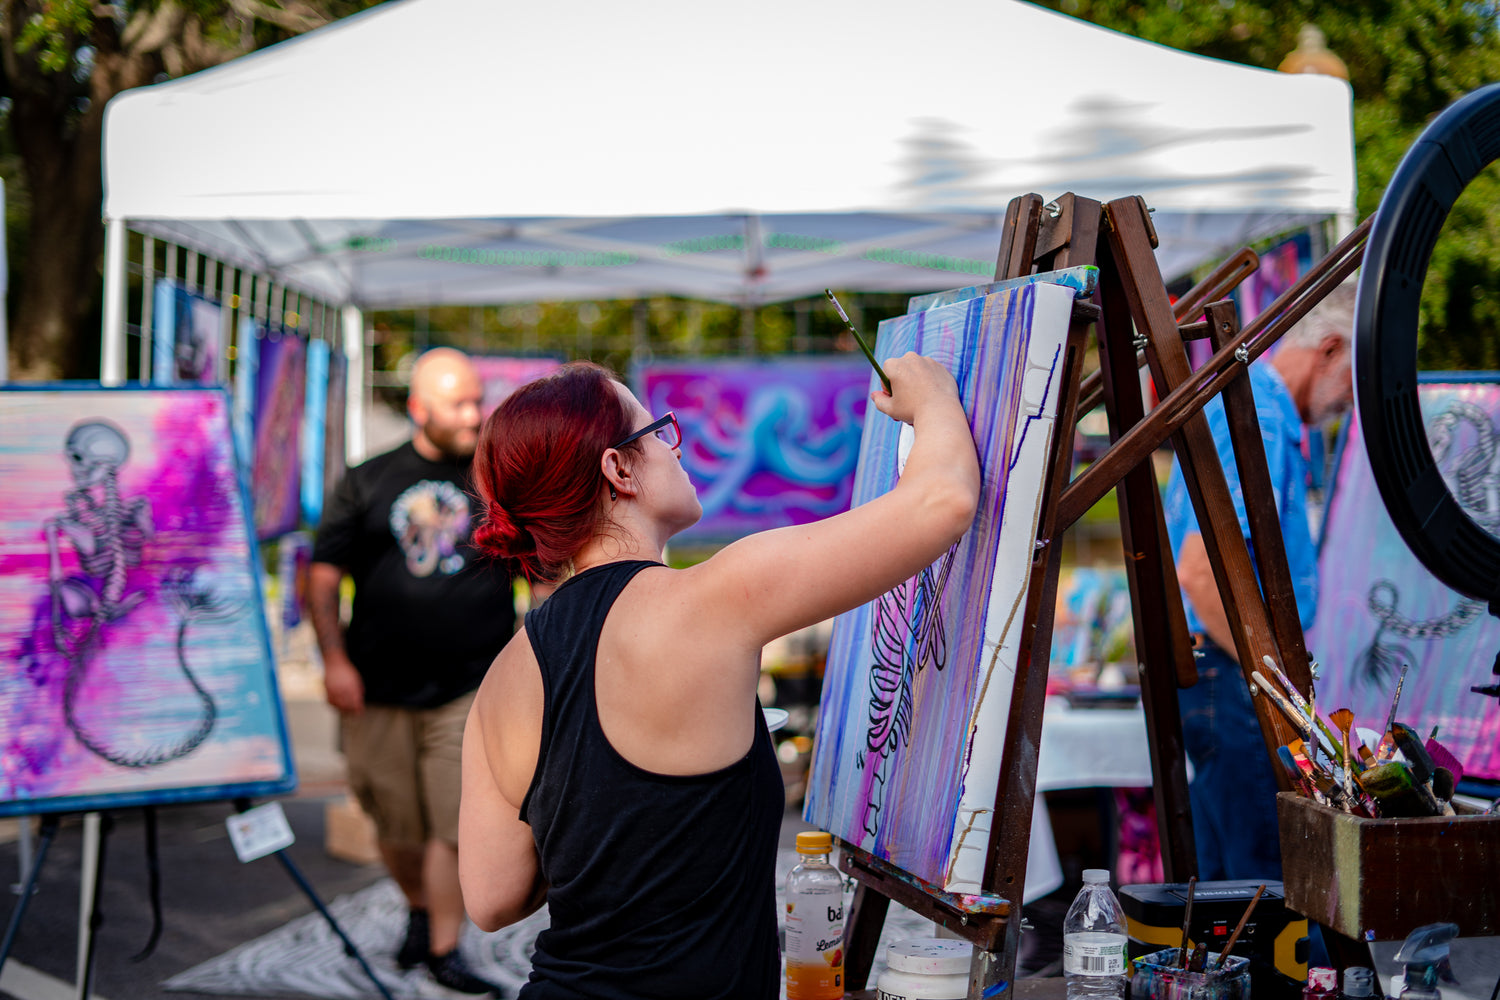 Artist painting outdoors in front of an art display